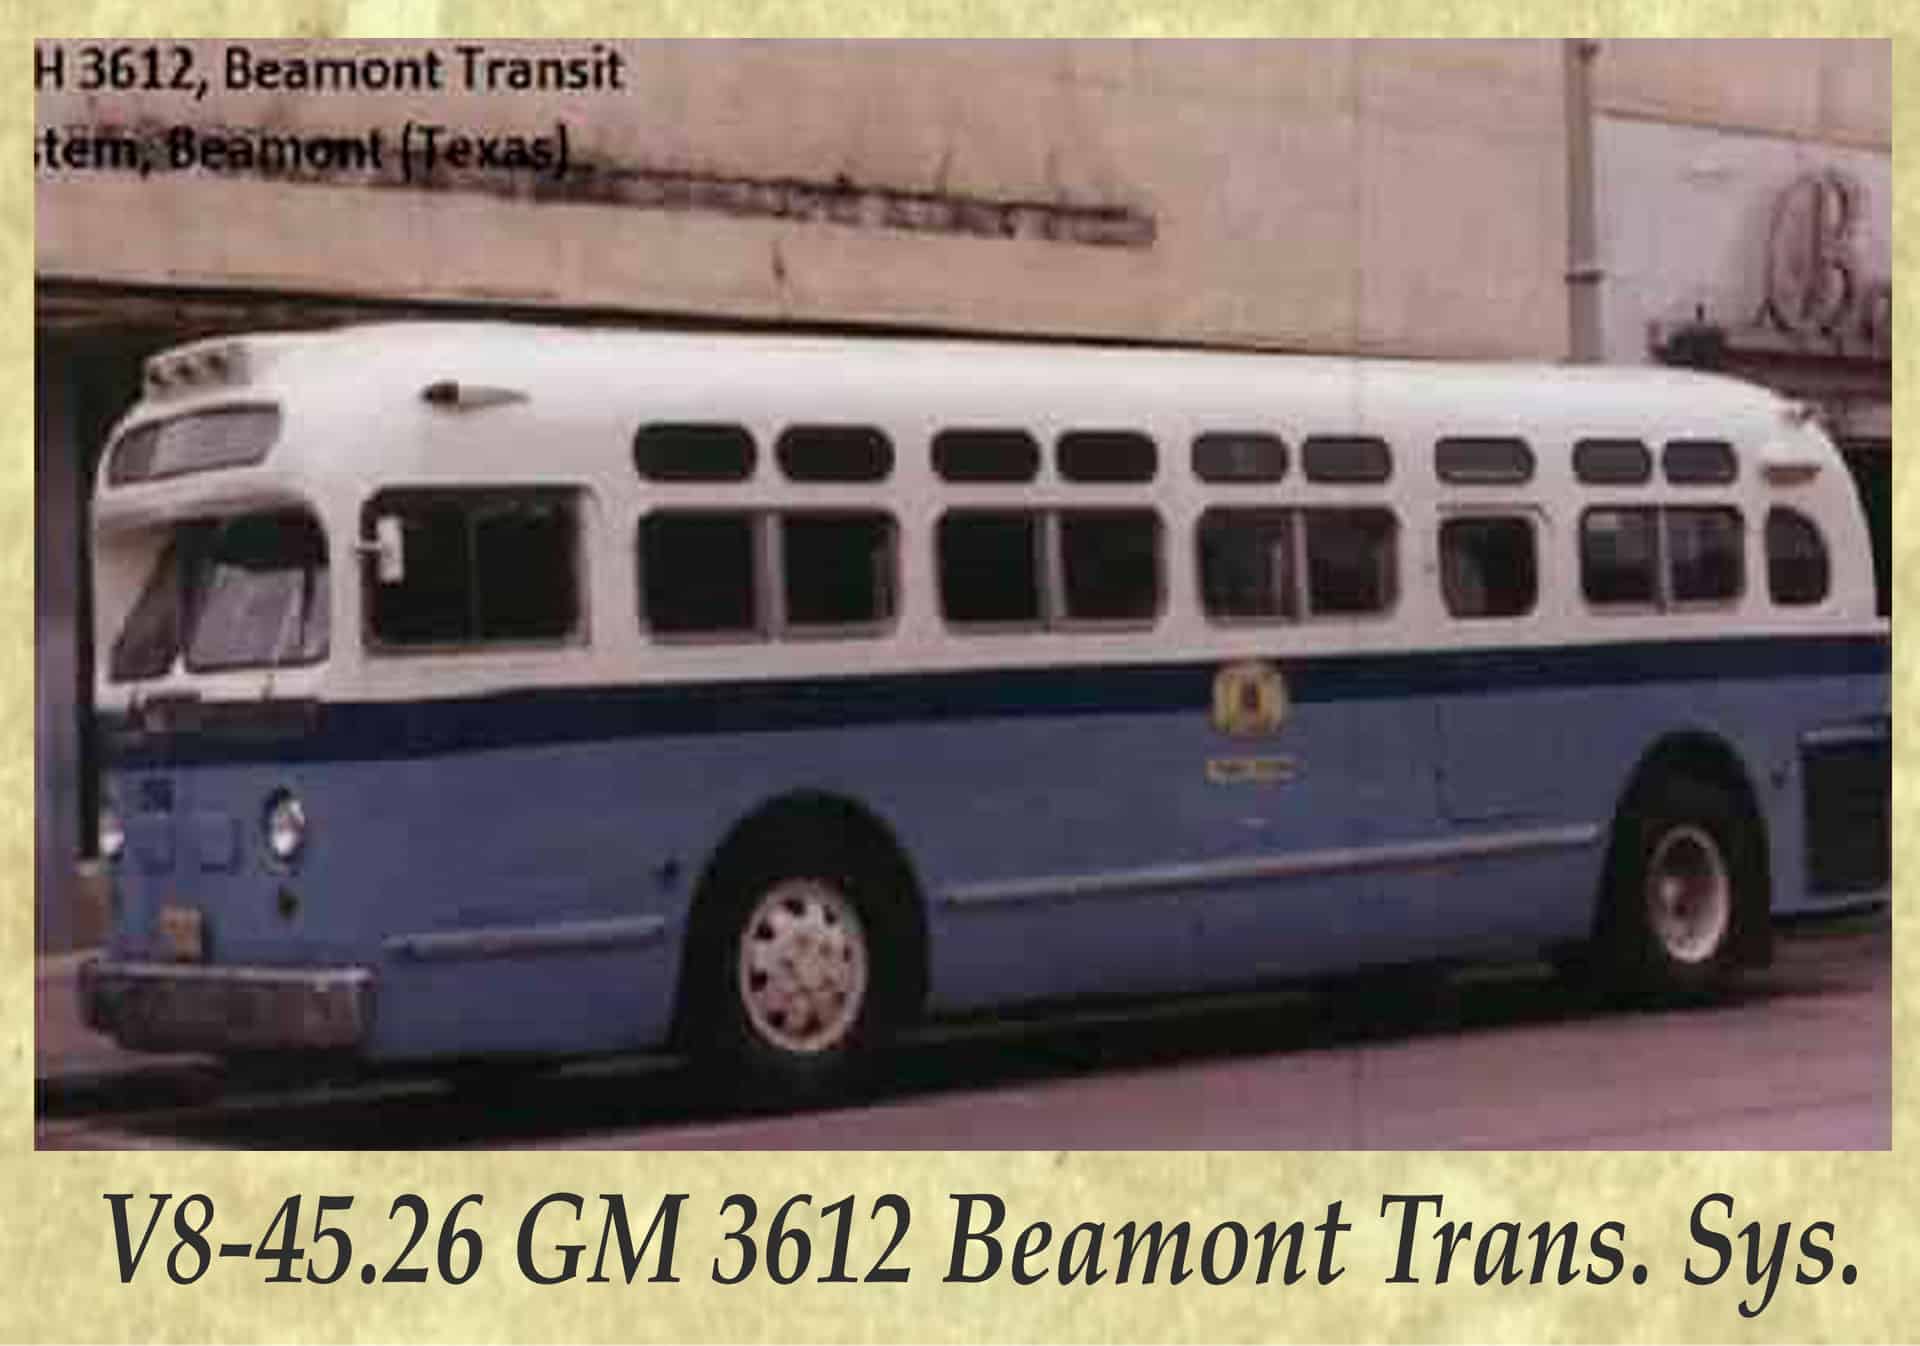 V8-45.26 GM 3612 Beamont Trans. Sys.